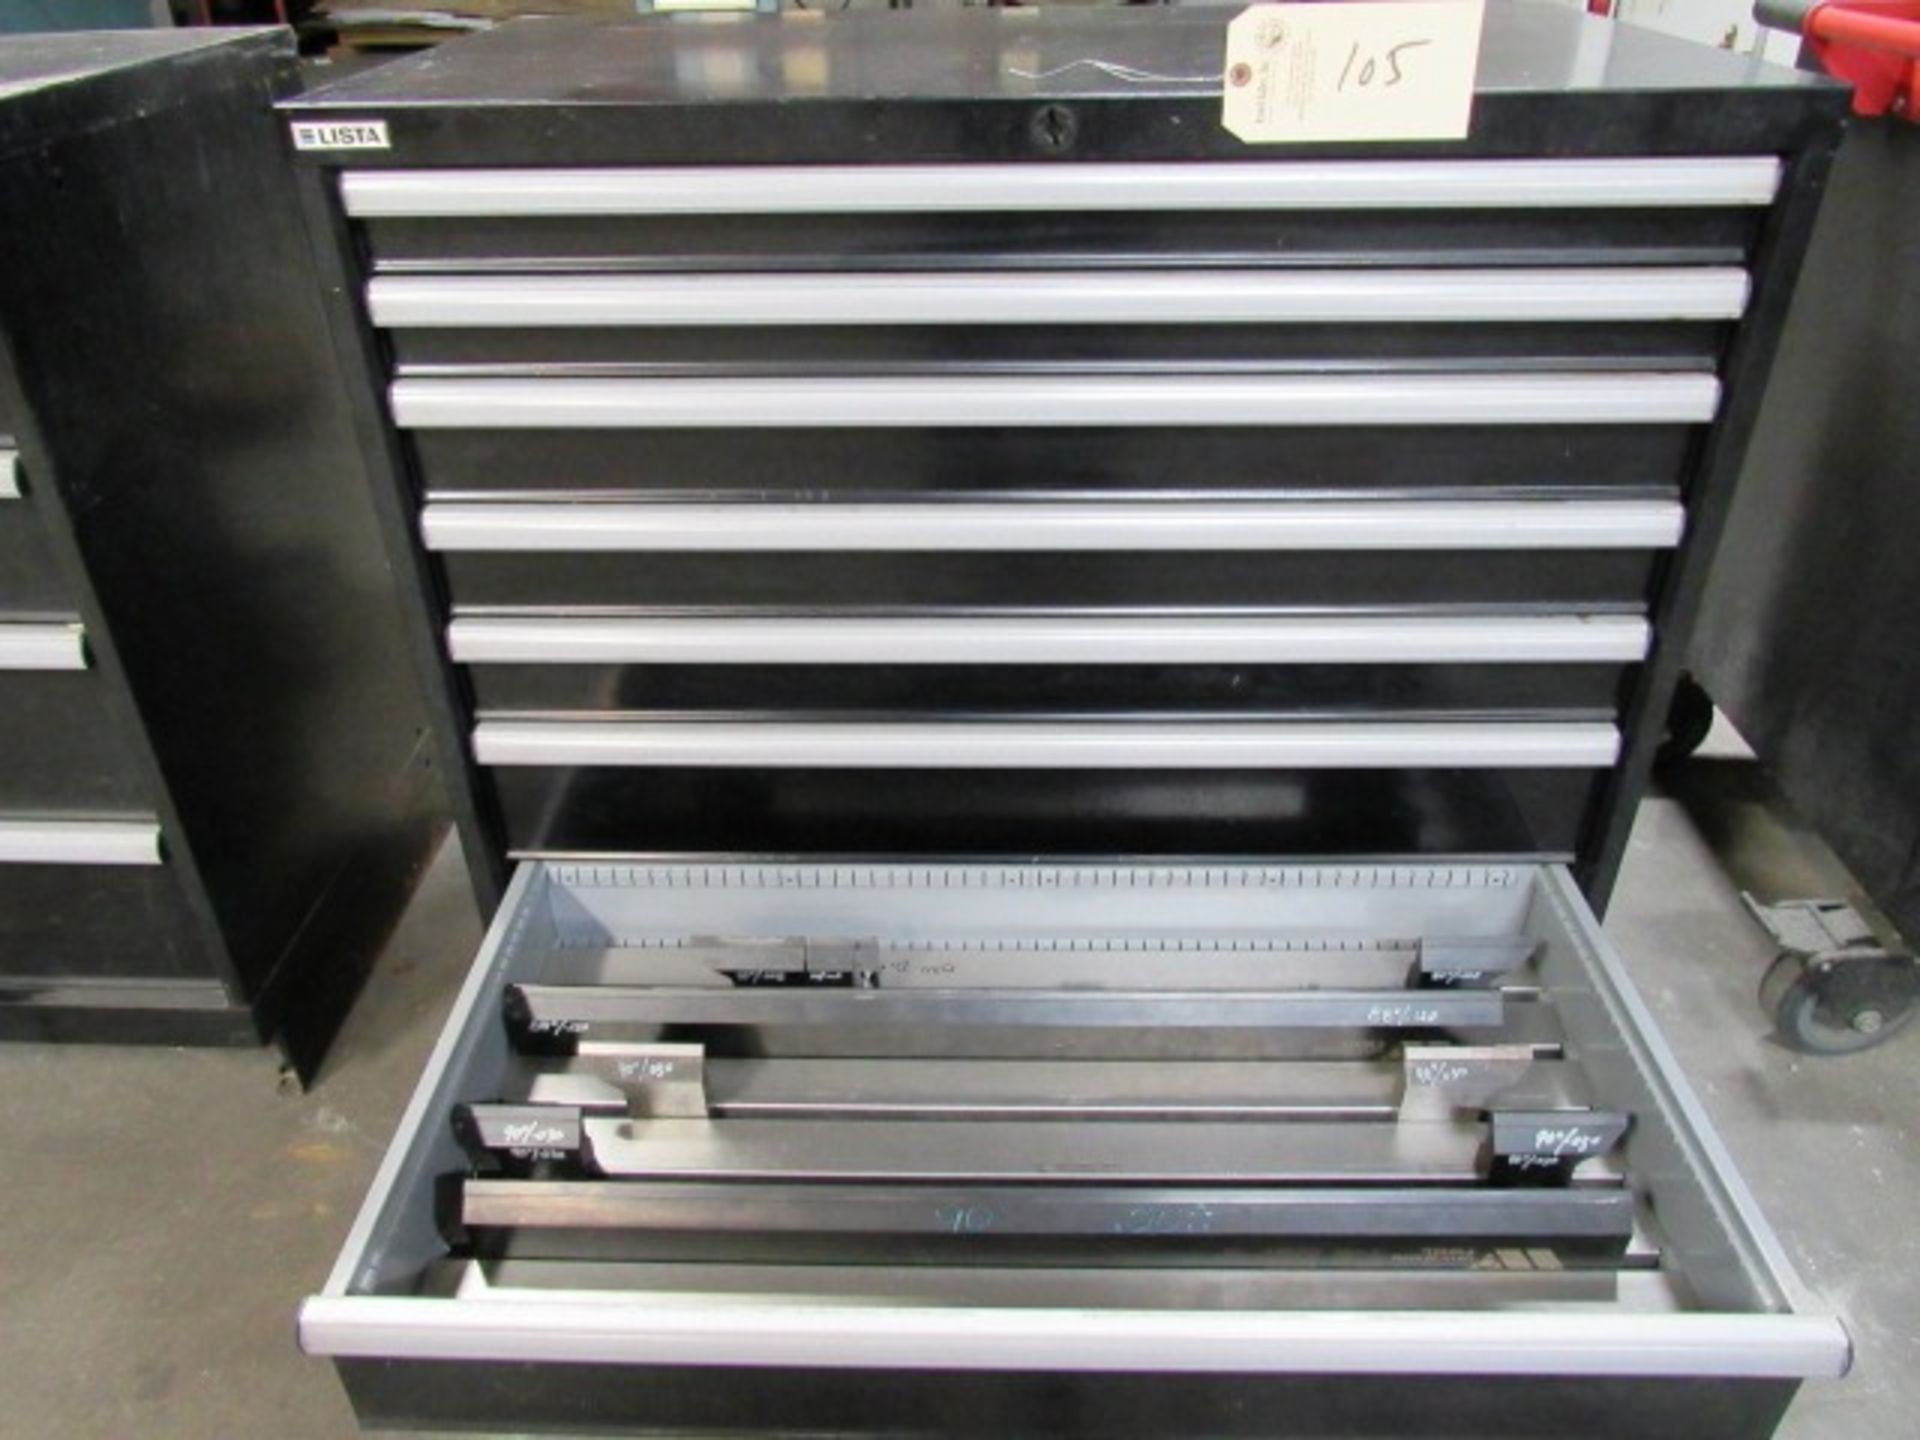 Lista 7 Drawer Cabinet with Press Brake Dies - Image 3 of 8